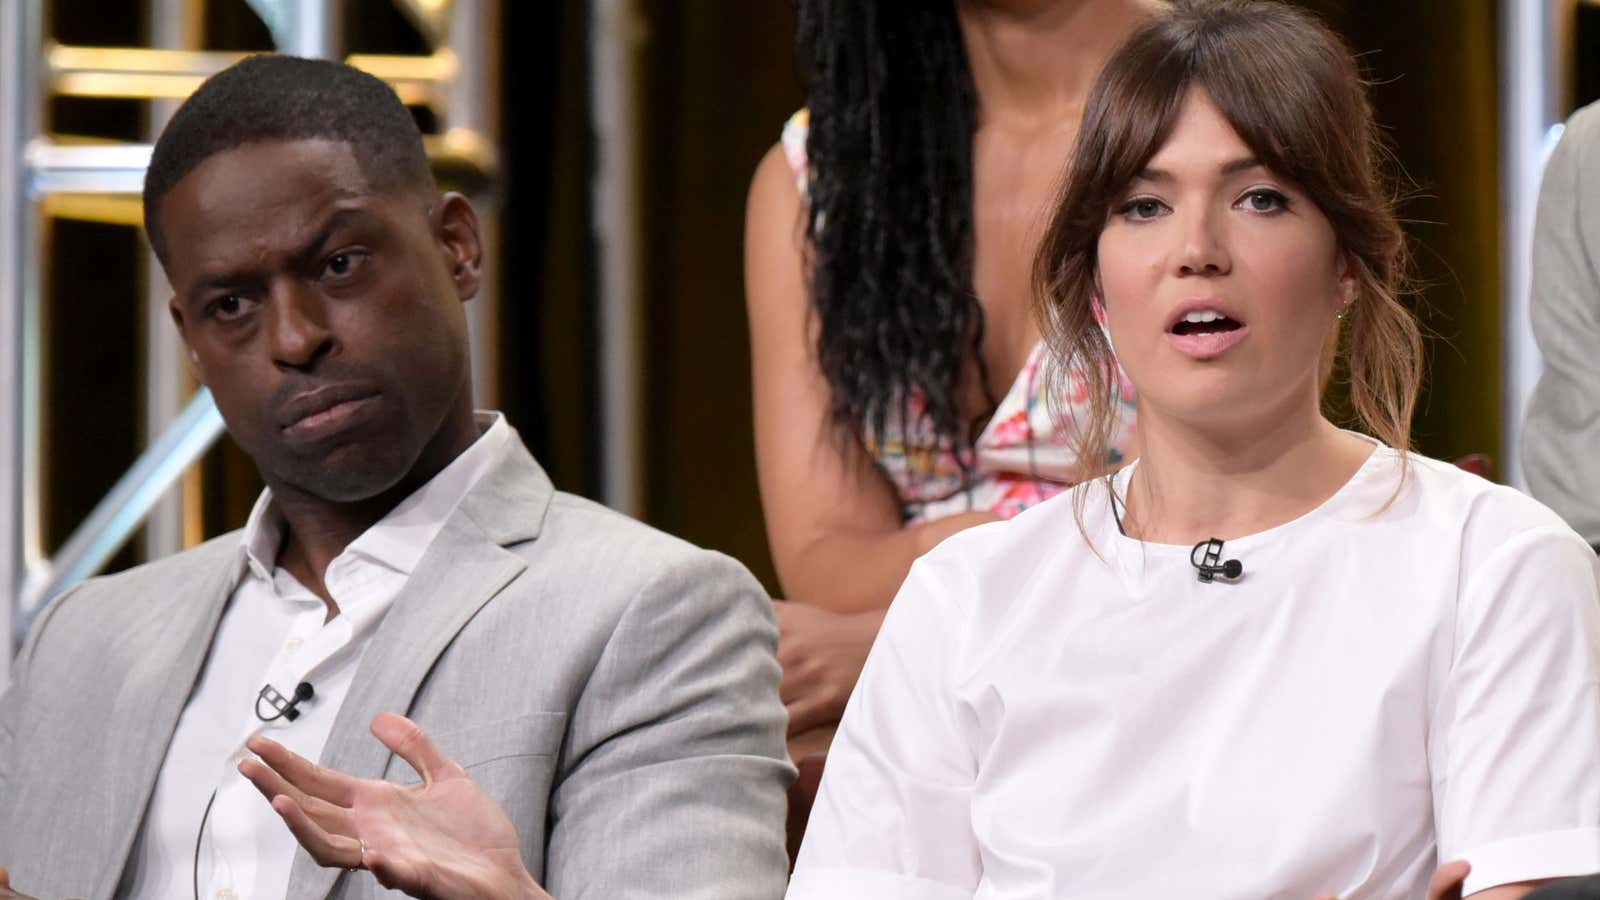 “This Is Us” stars Sterling K. Brown and Mandy Moore were among those to stick up for their lesser-known co-workers.